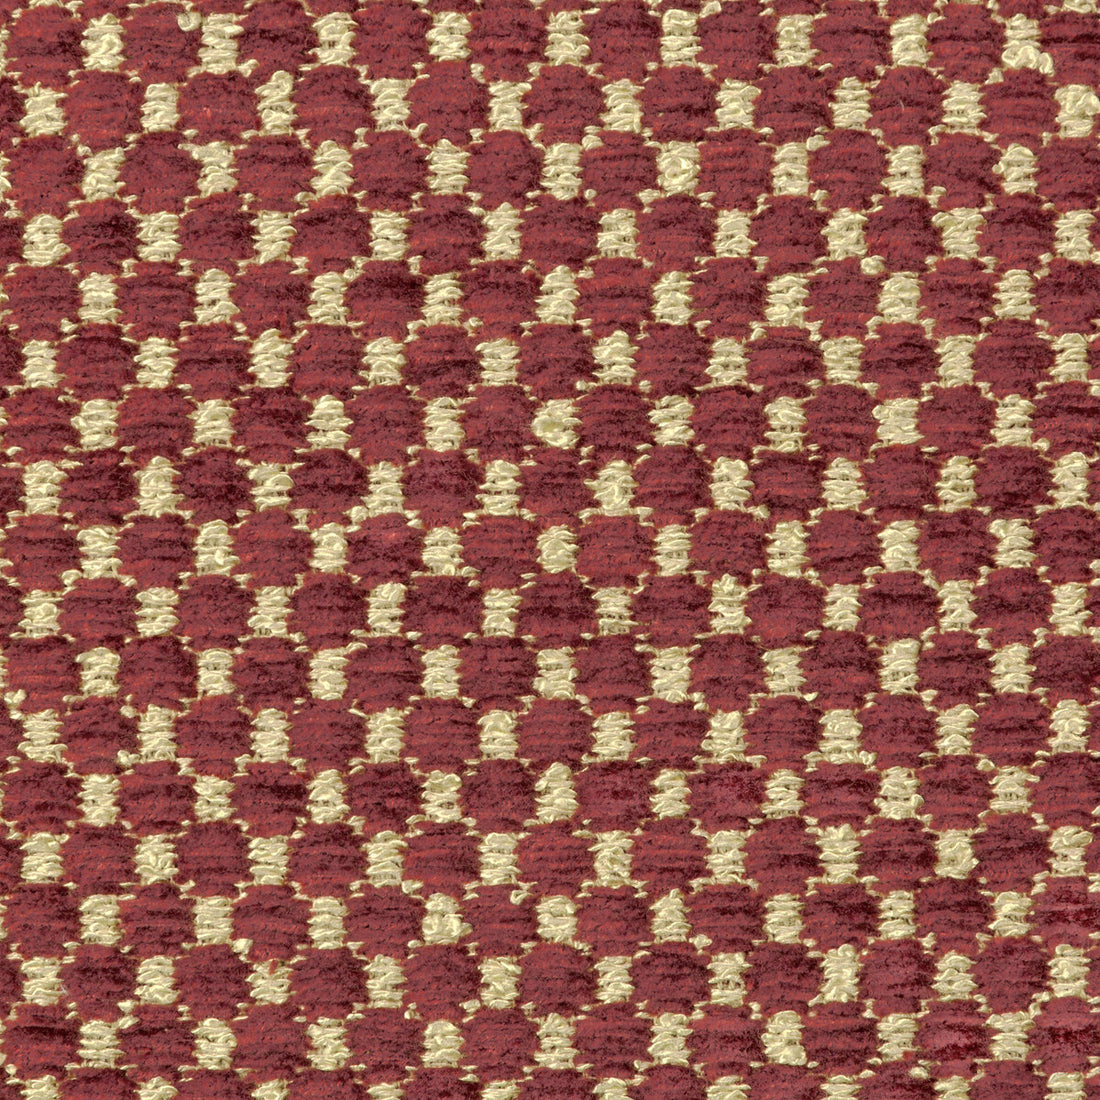 Ecrins Texture fabric in ruby color - pattern 8019147.9.0 - by Brunschwig &amp; Fils in the Chambery Textures II collection